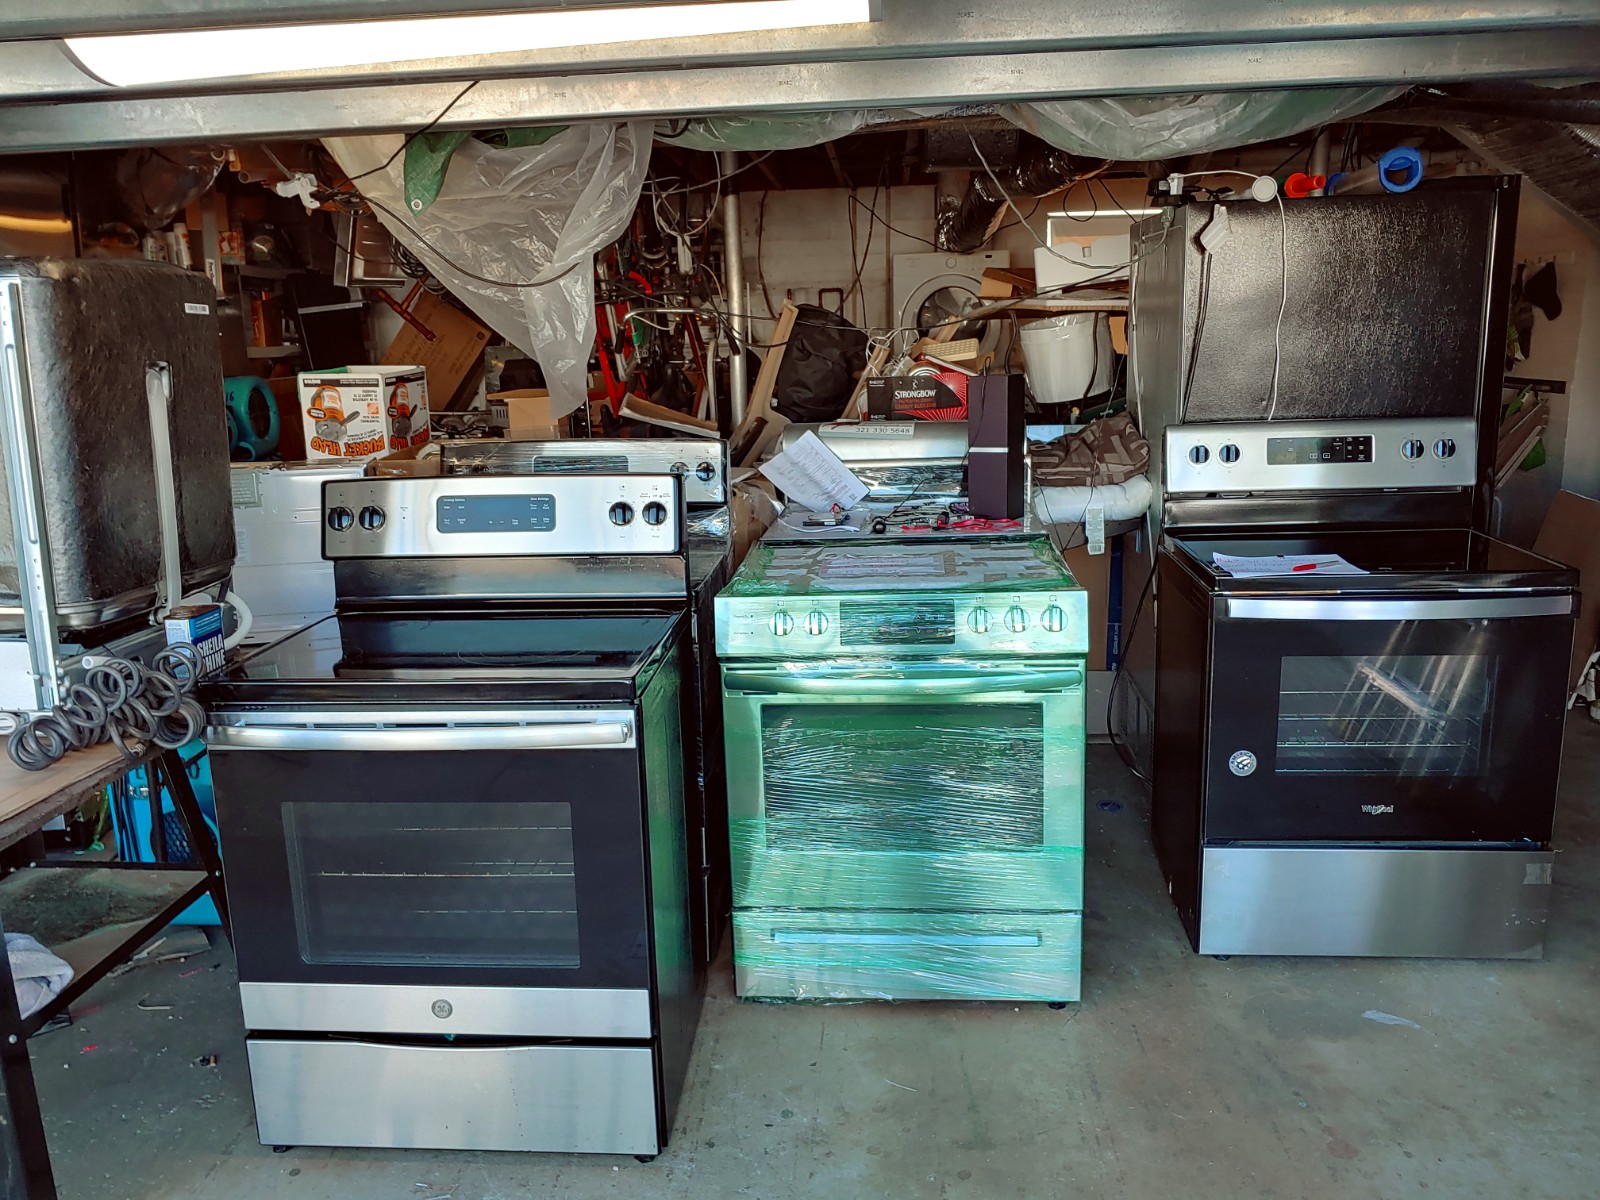 2 Arrested After Detectives Recover Appliances Stolen In Burglary Spree Image